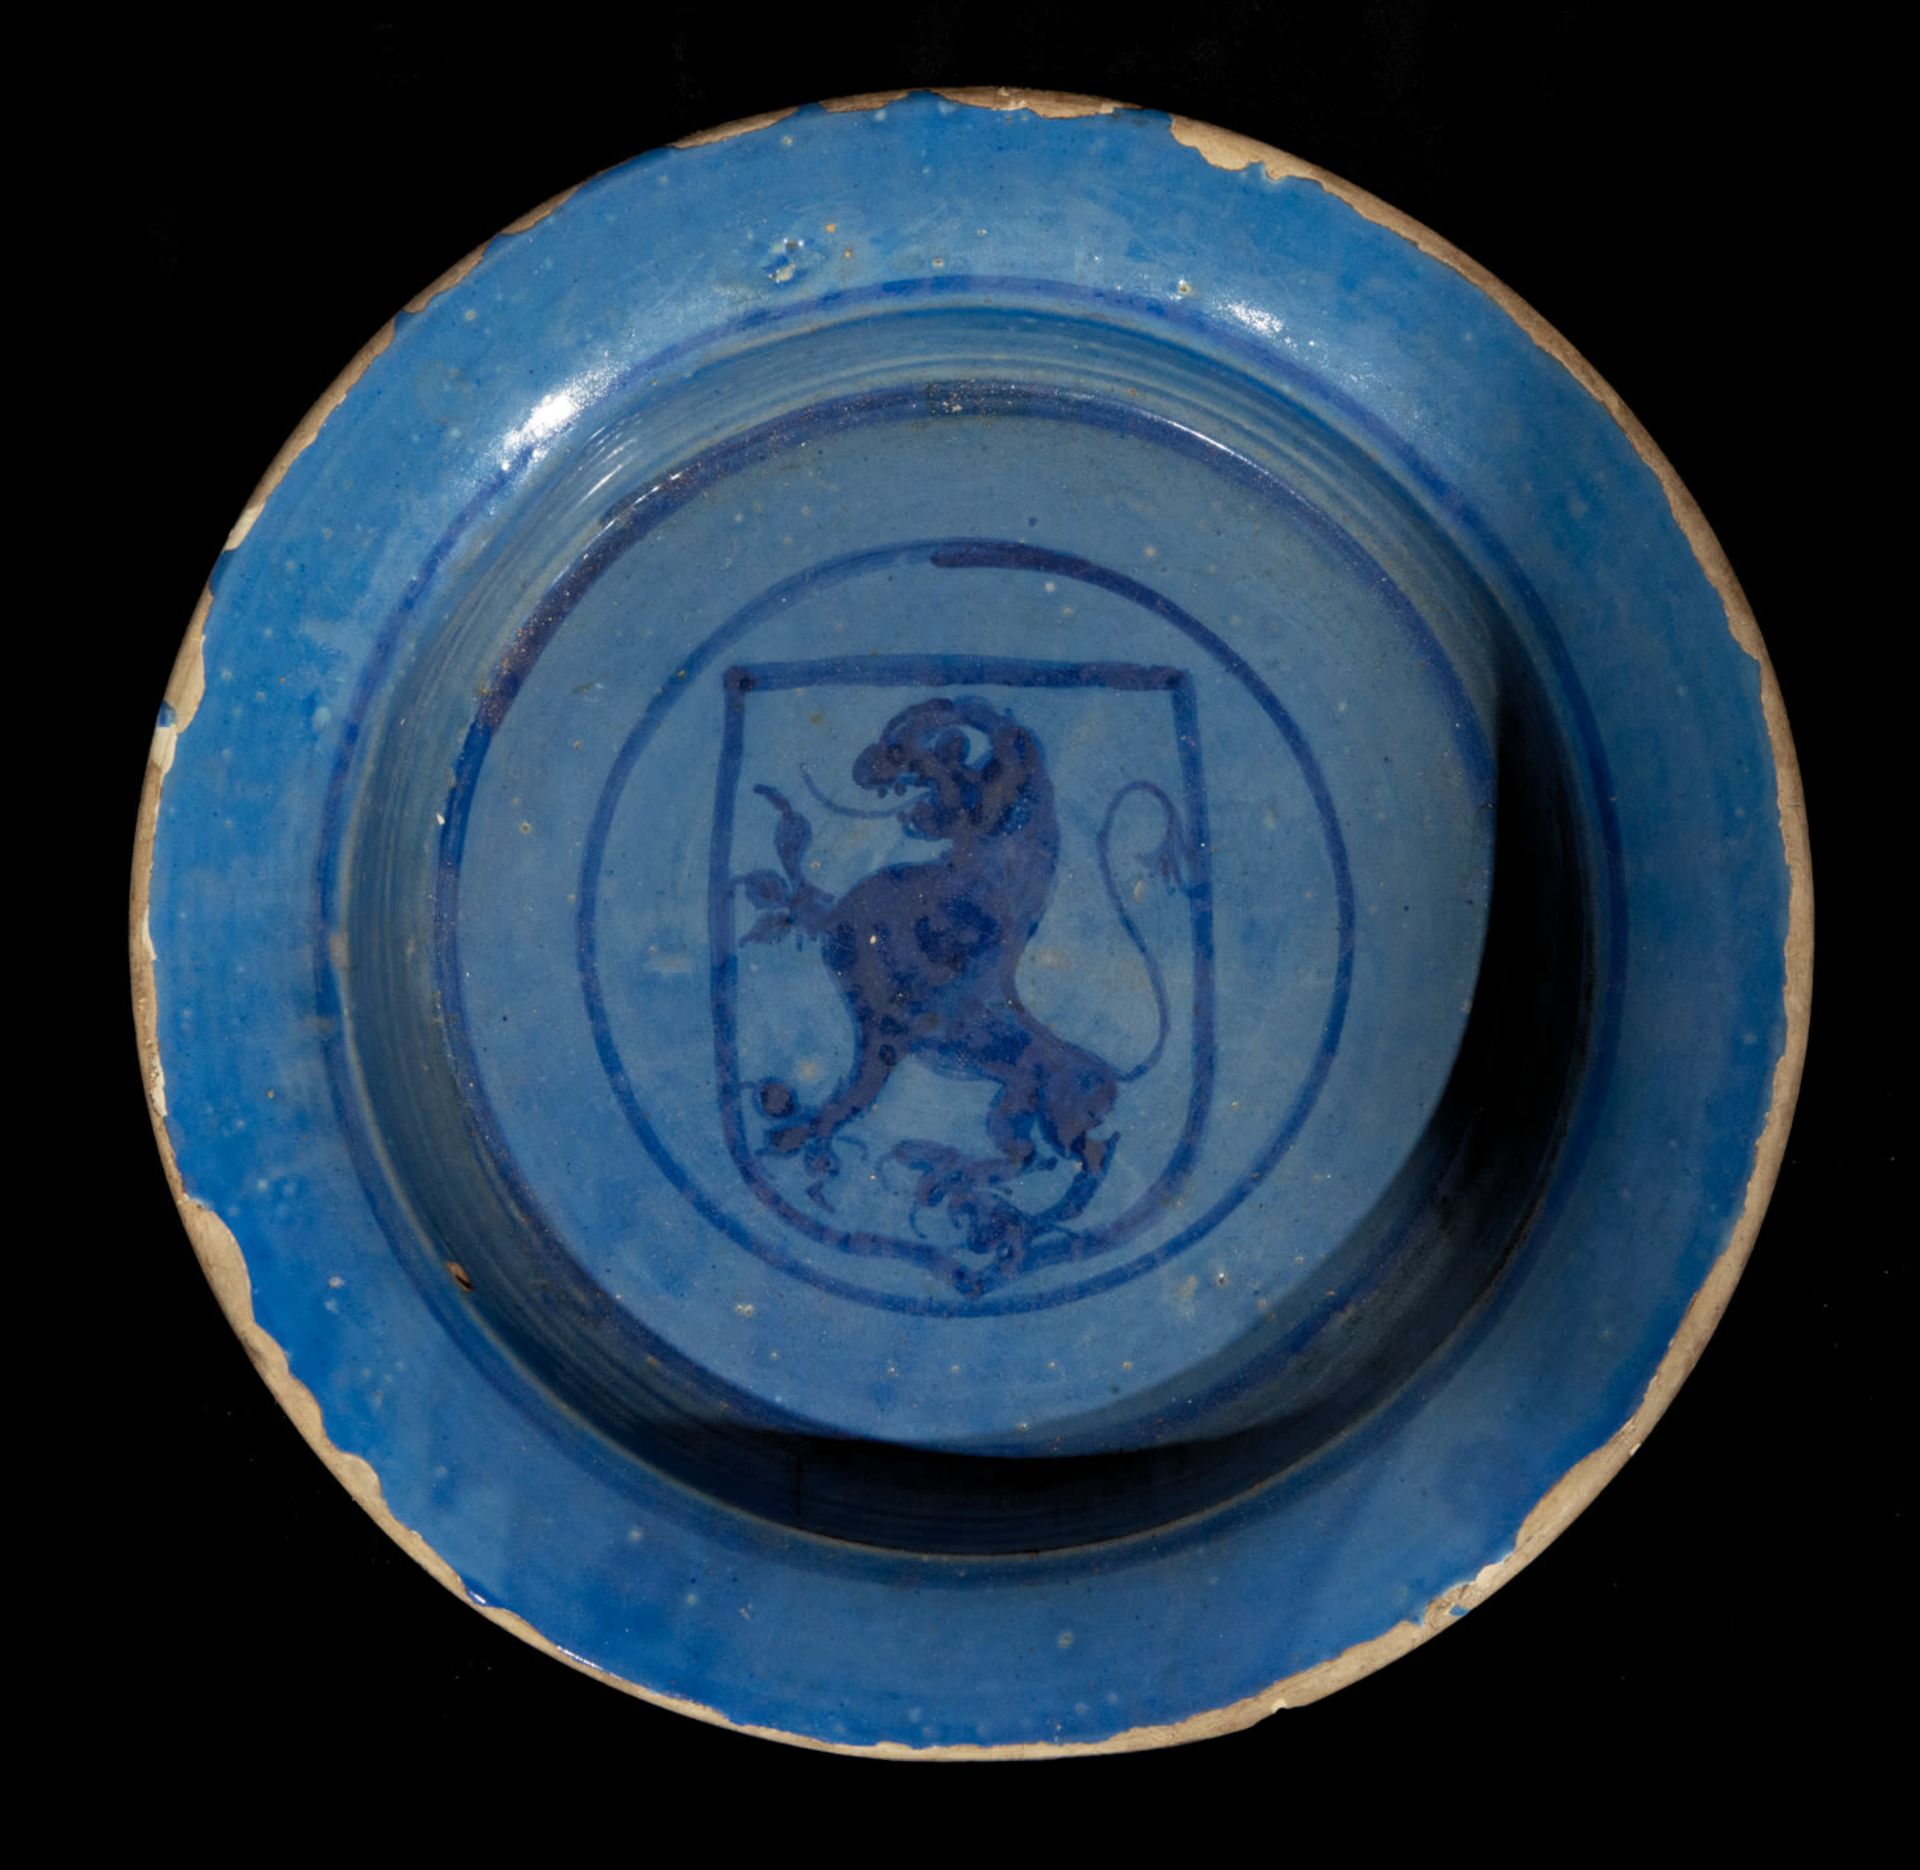 Spectacular Large Plate in enameled blue from Manises with Lion rampant from the 16th century